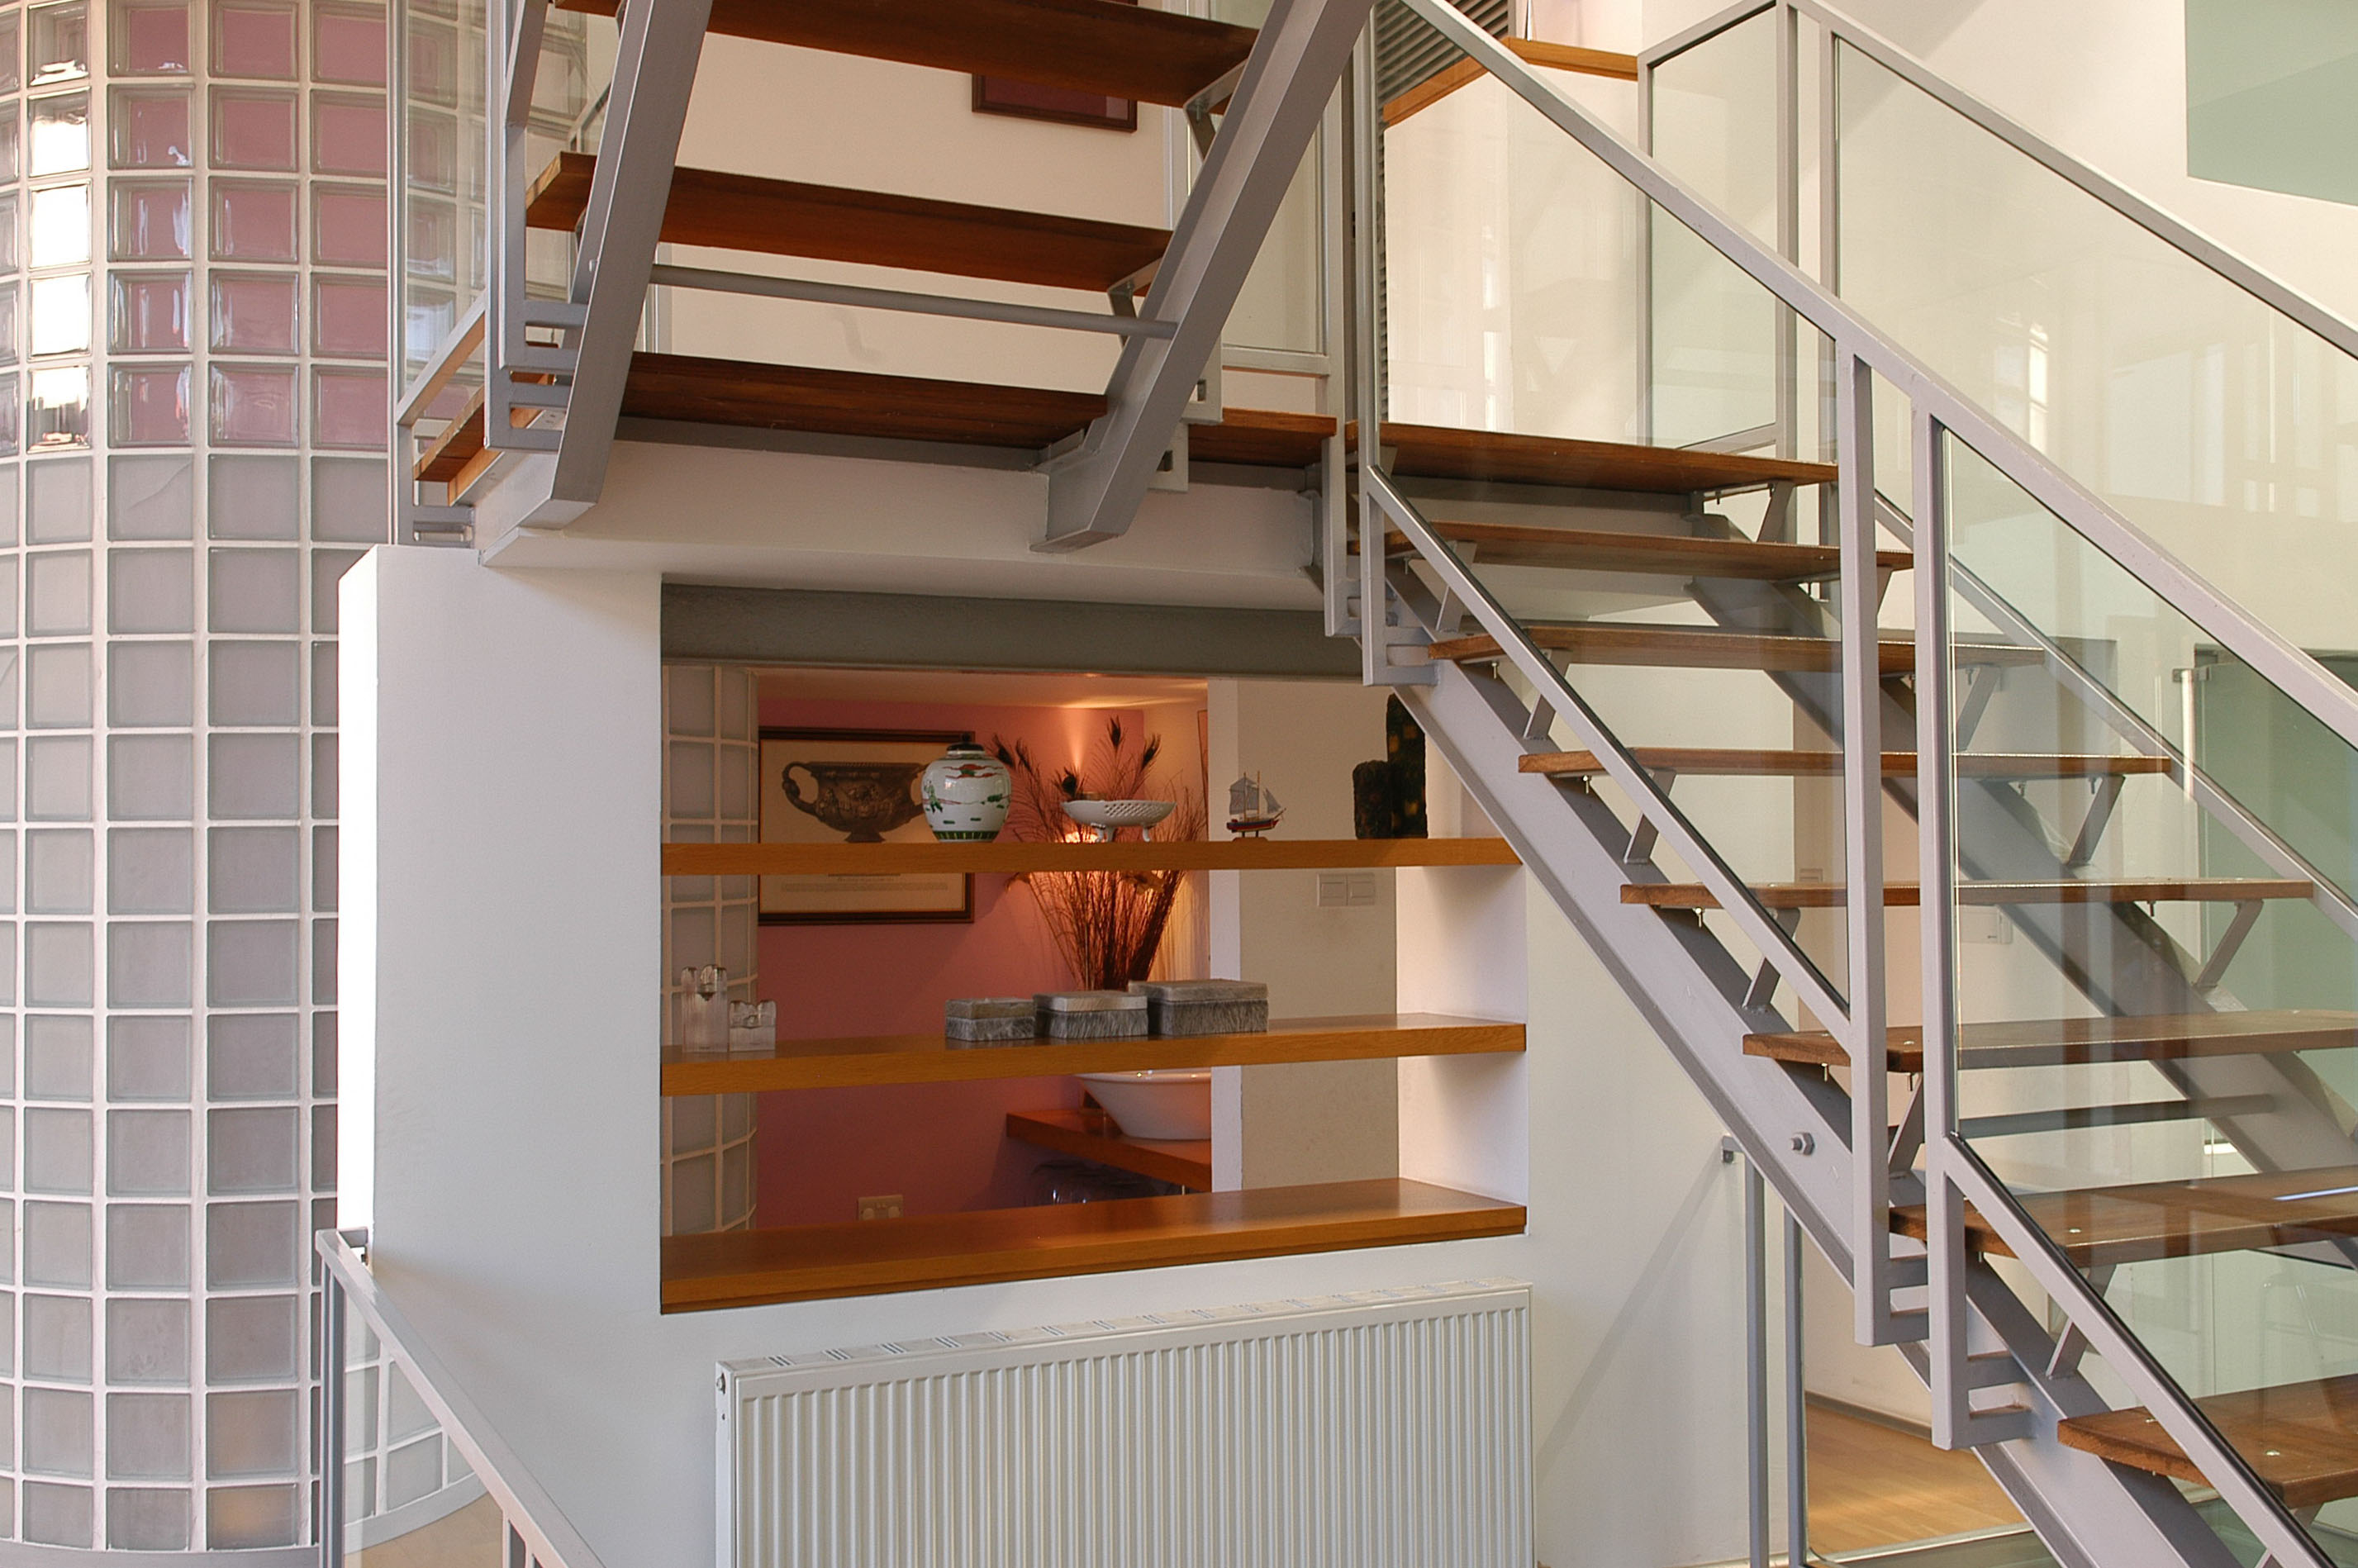 A live-work space - Stair Detail